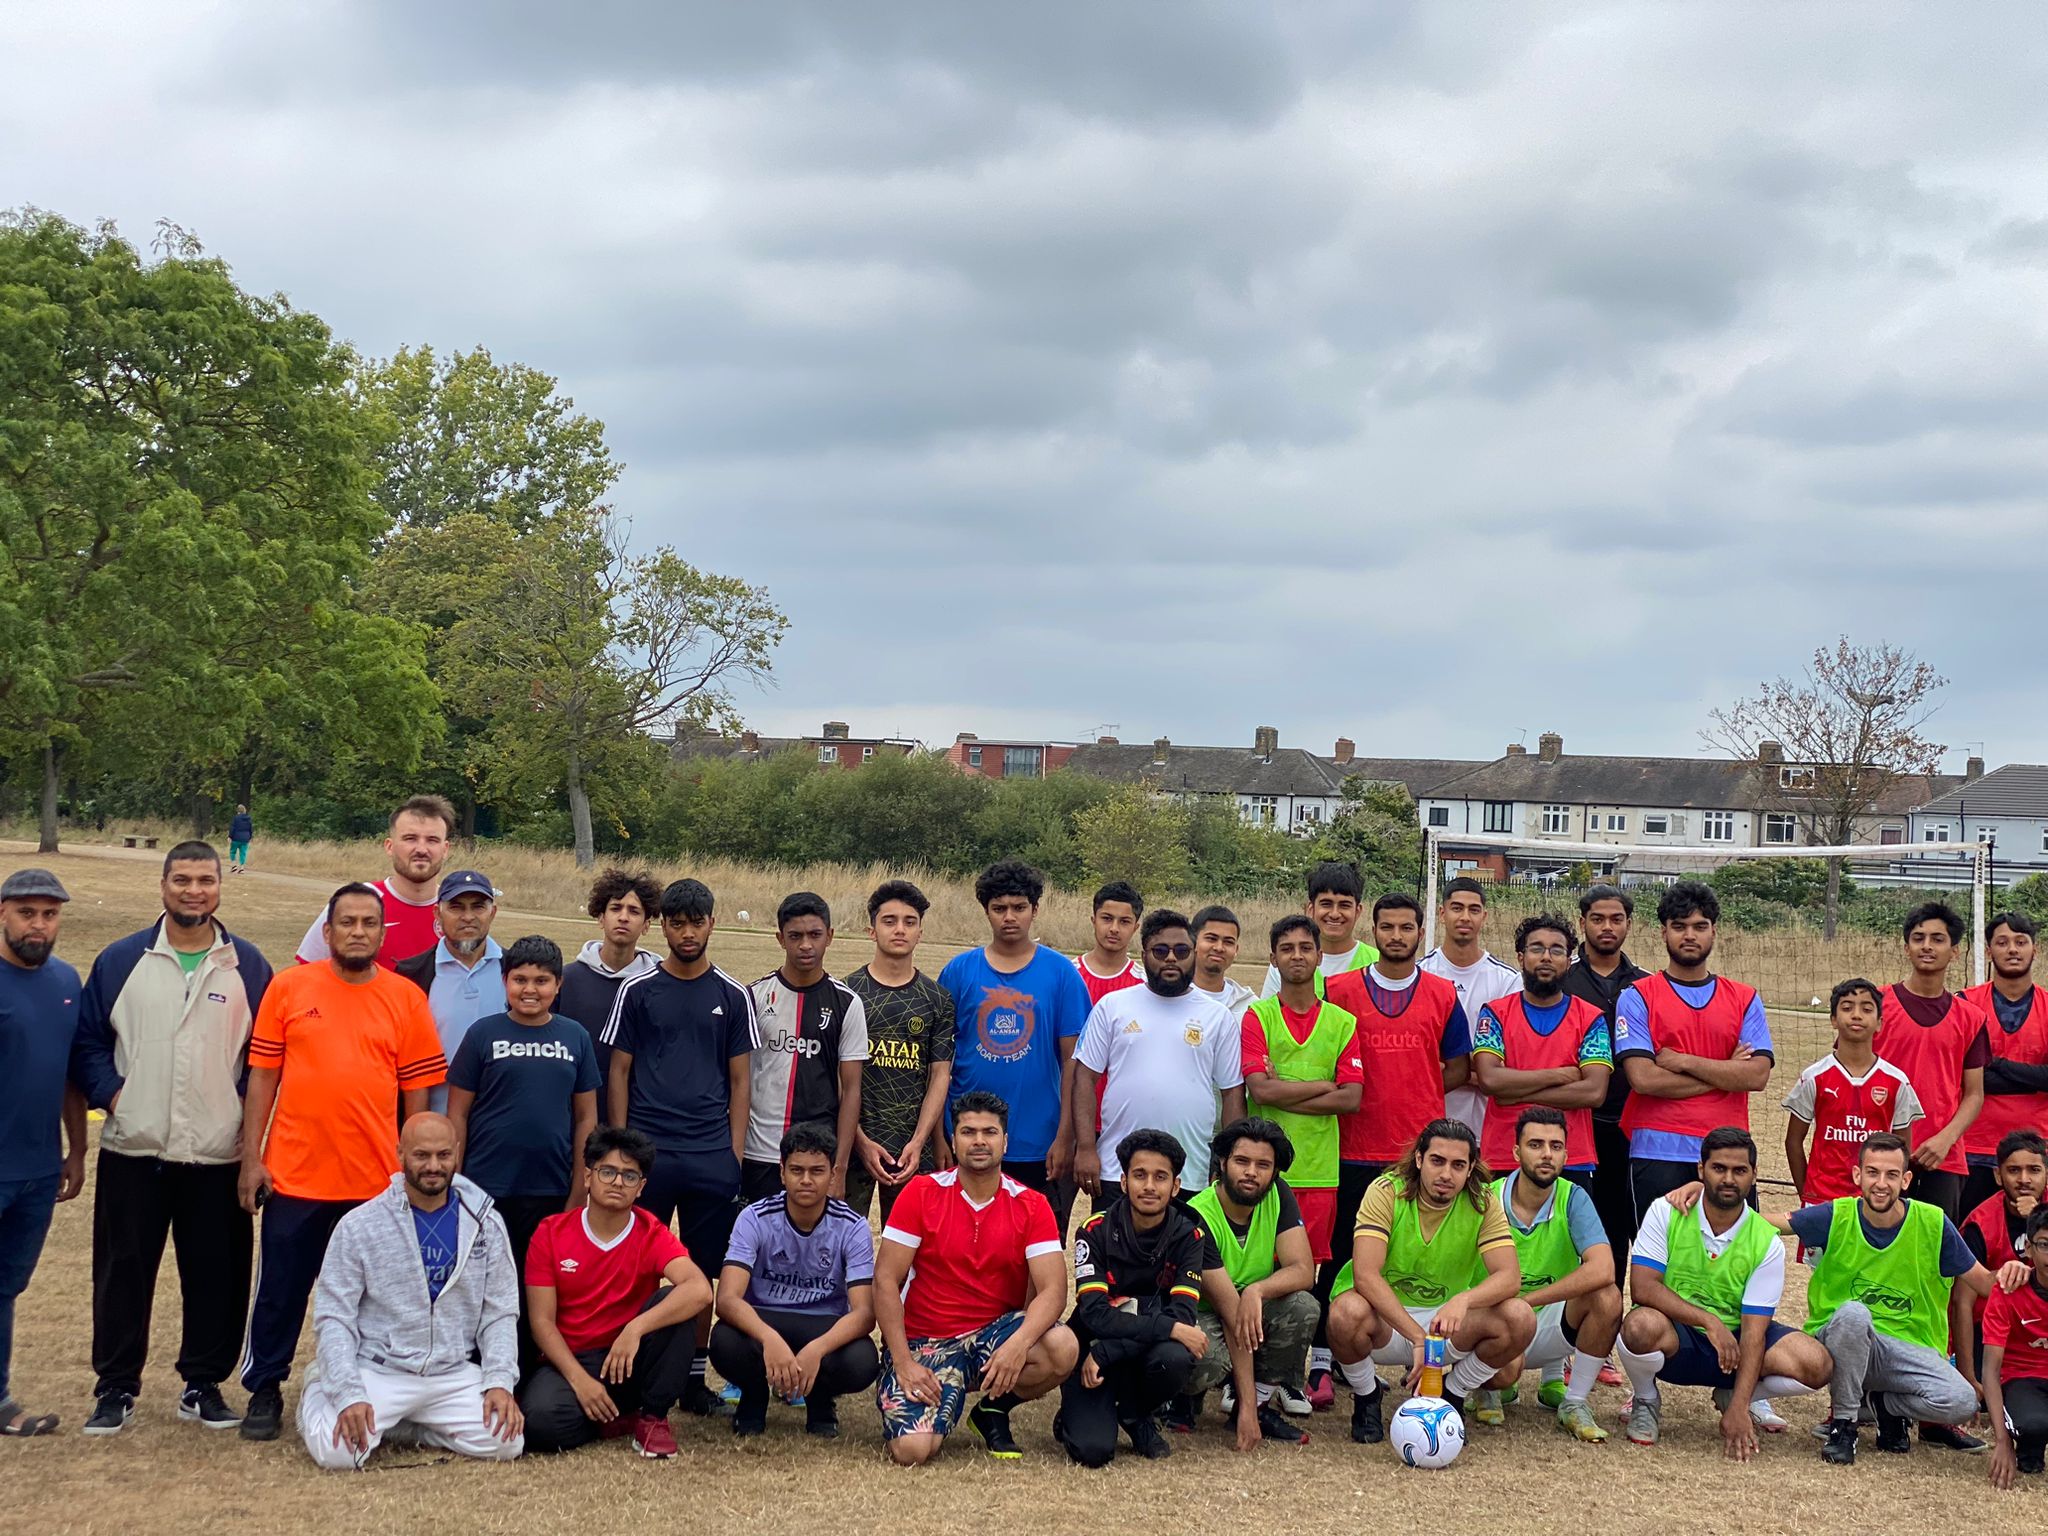 BCF held their inaugural football tournament in Mayesbrook Park